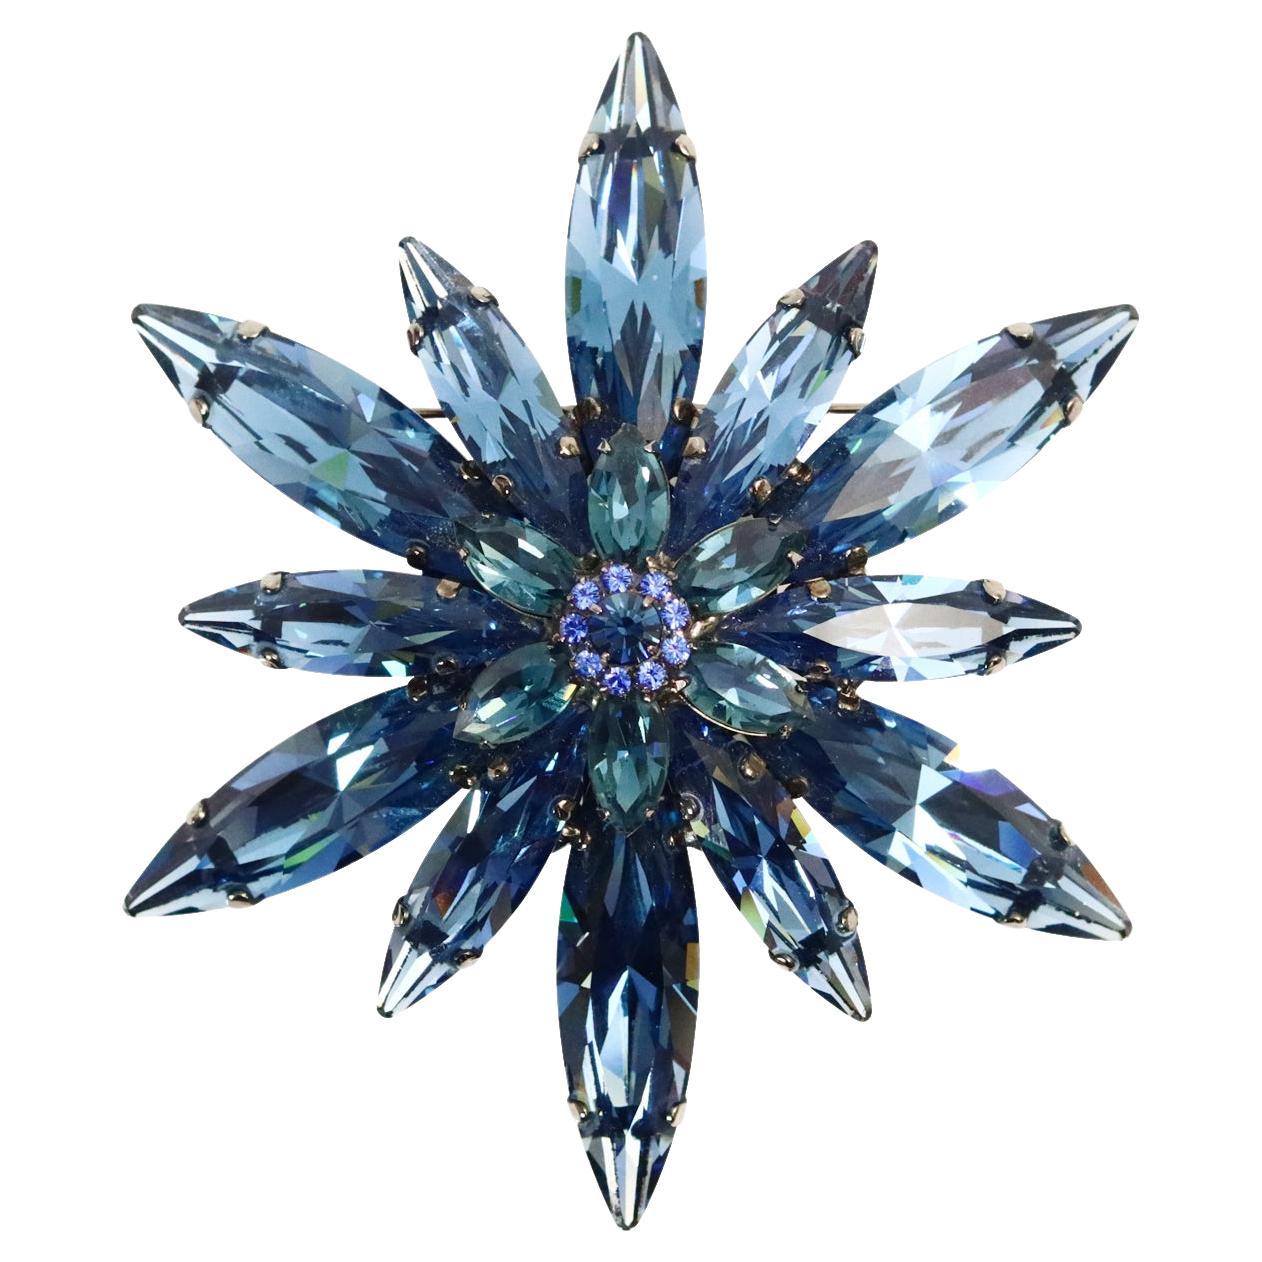 Modern Collectible Tim Szlyk Montana Blue Crystal Brooch Circa 2000s For Sale